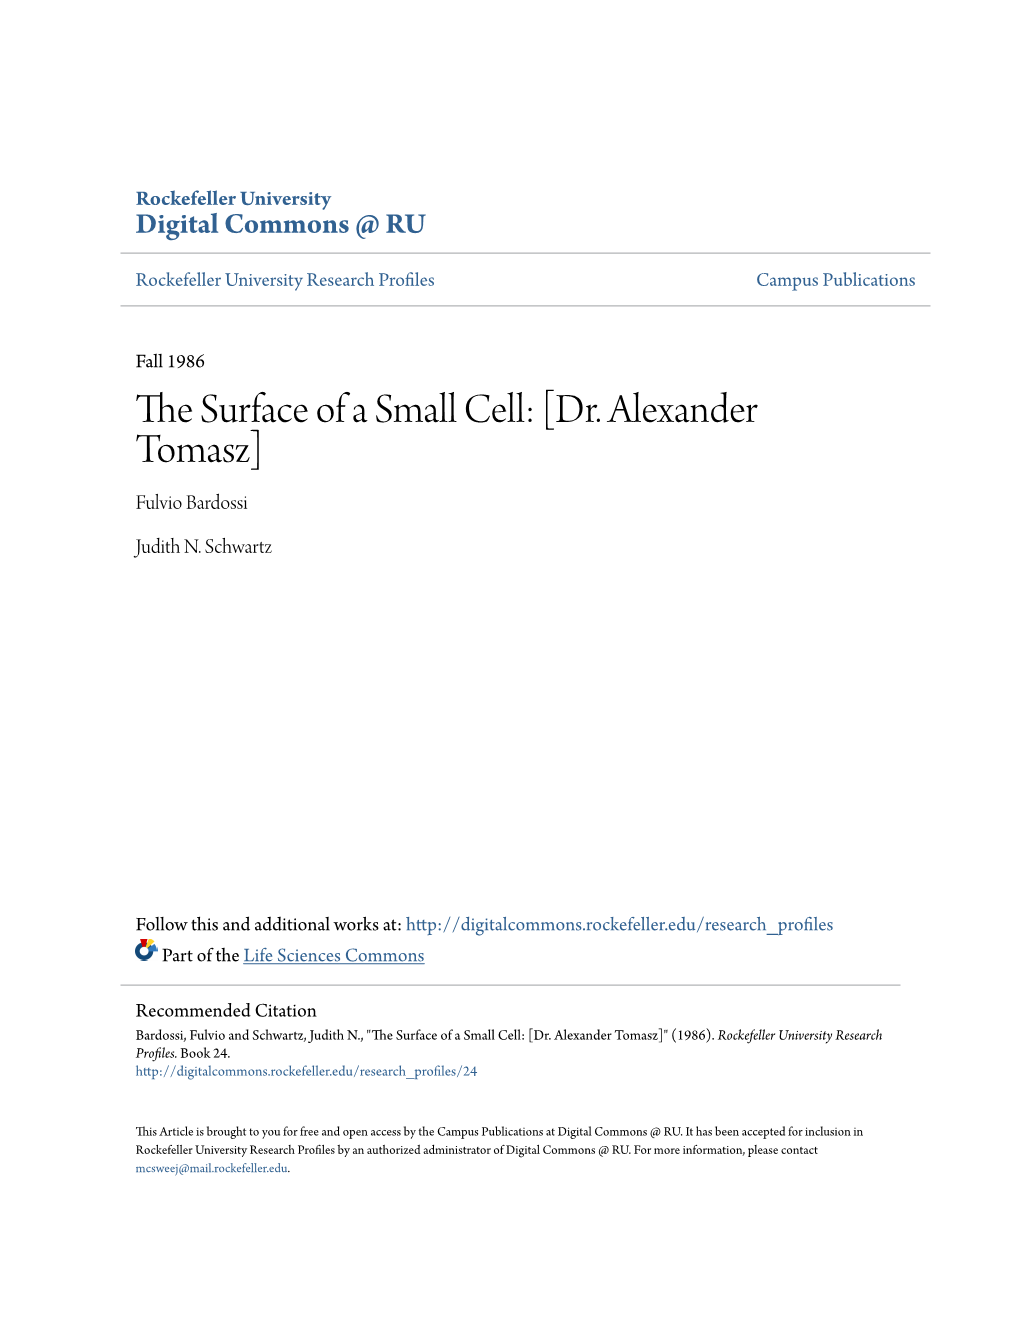 The Surface of a Small Cell: [Dr. Alexander Tomasz]